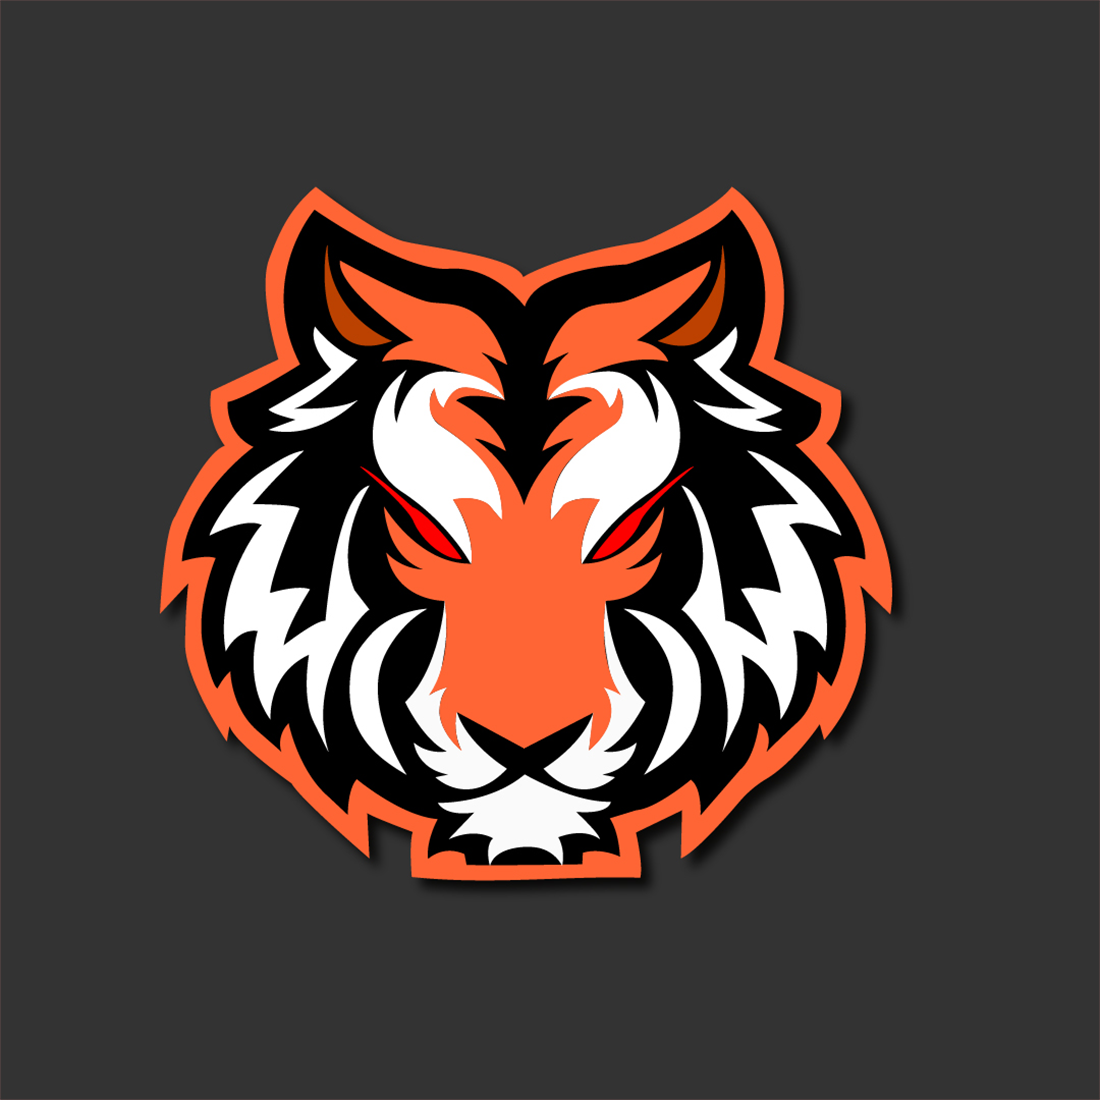 Tiger Head illustration made in the illustrator preview image.